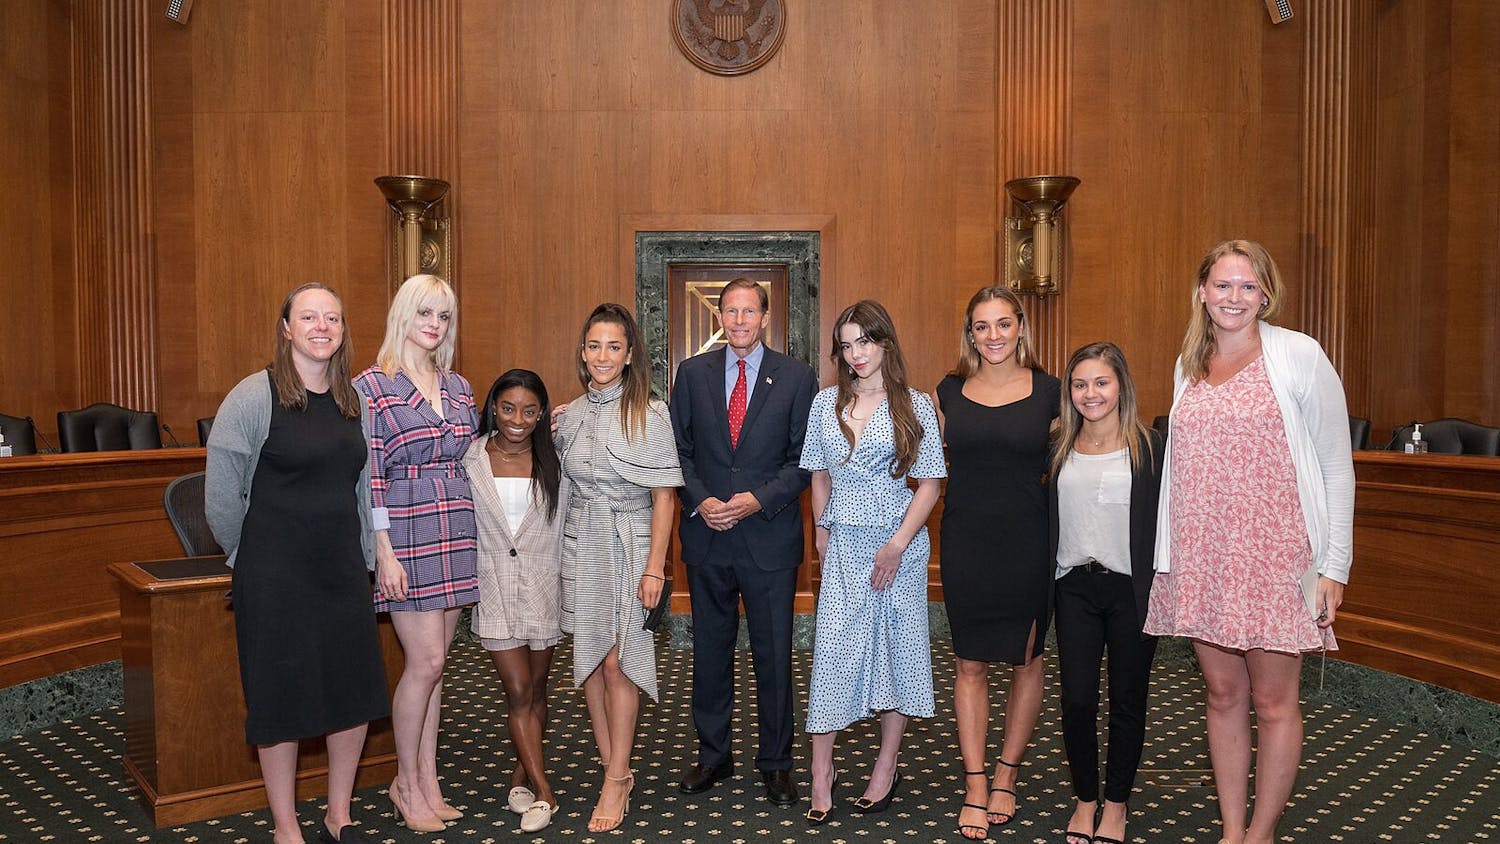 USA Gymnastics stars Simone Biles, Aly Raisman, McKayla Maroney and Maggie Nichols testified before Congress during a 2021 Senate Judiciary Committee Hearing about the FBI’s failure to put a stop to Nassar’s abuse (Photo courtesy of WikiMedia Commons / by U.S. Sen. Richard Blumenthal, September 15, 2021).